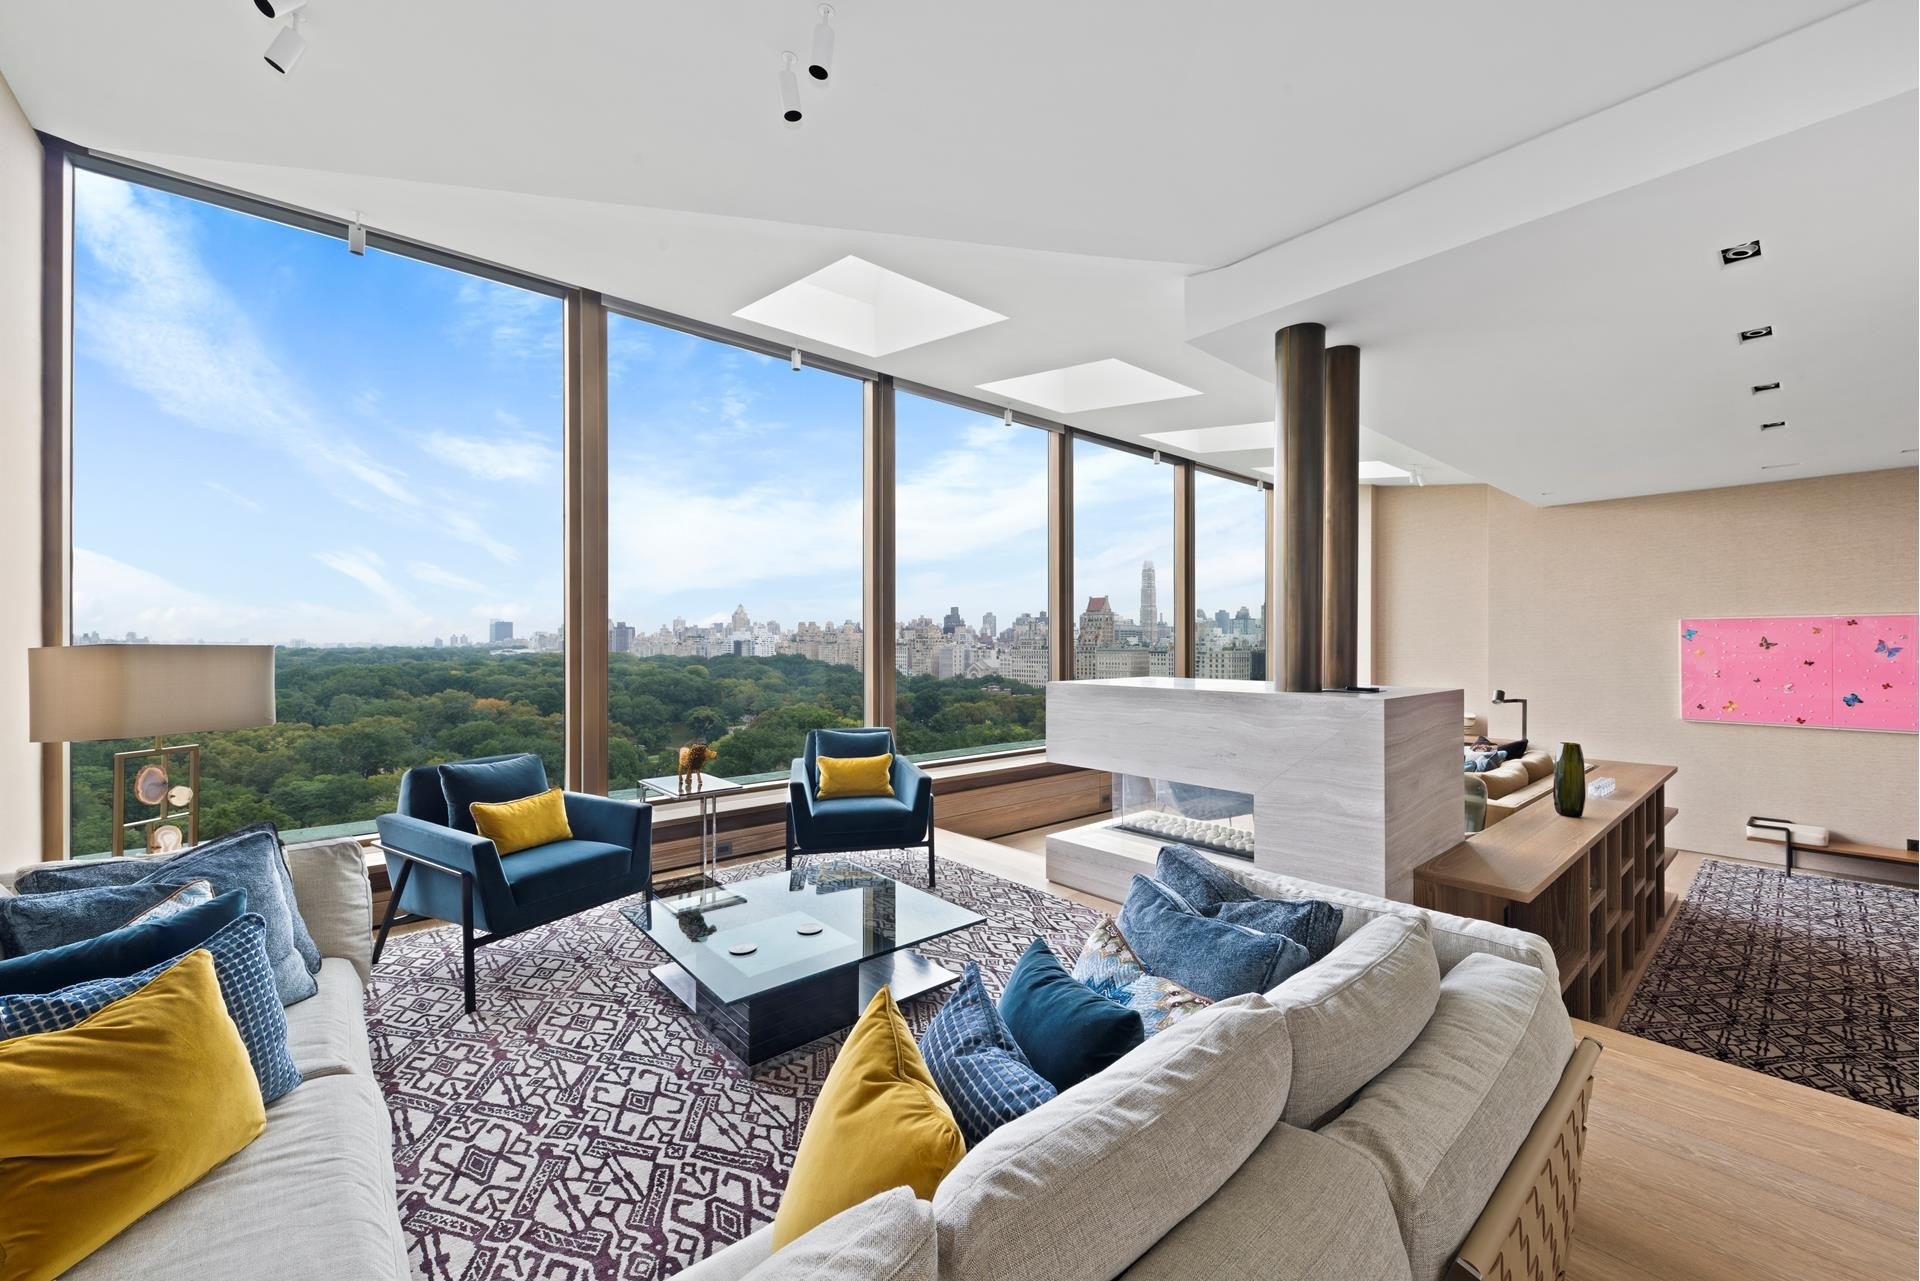 Co-op Properties for Sale at 128 CENTRAL PARK S, PH/15A Central Park South, New York, NY 10019